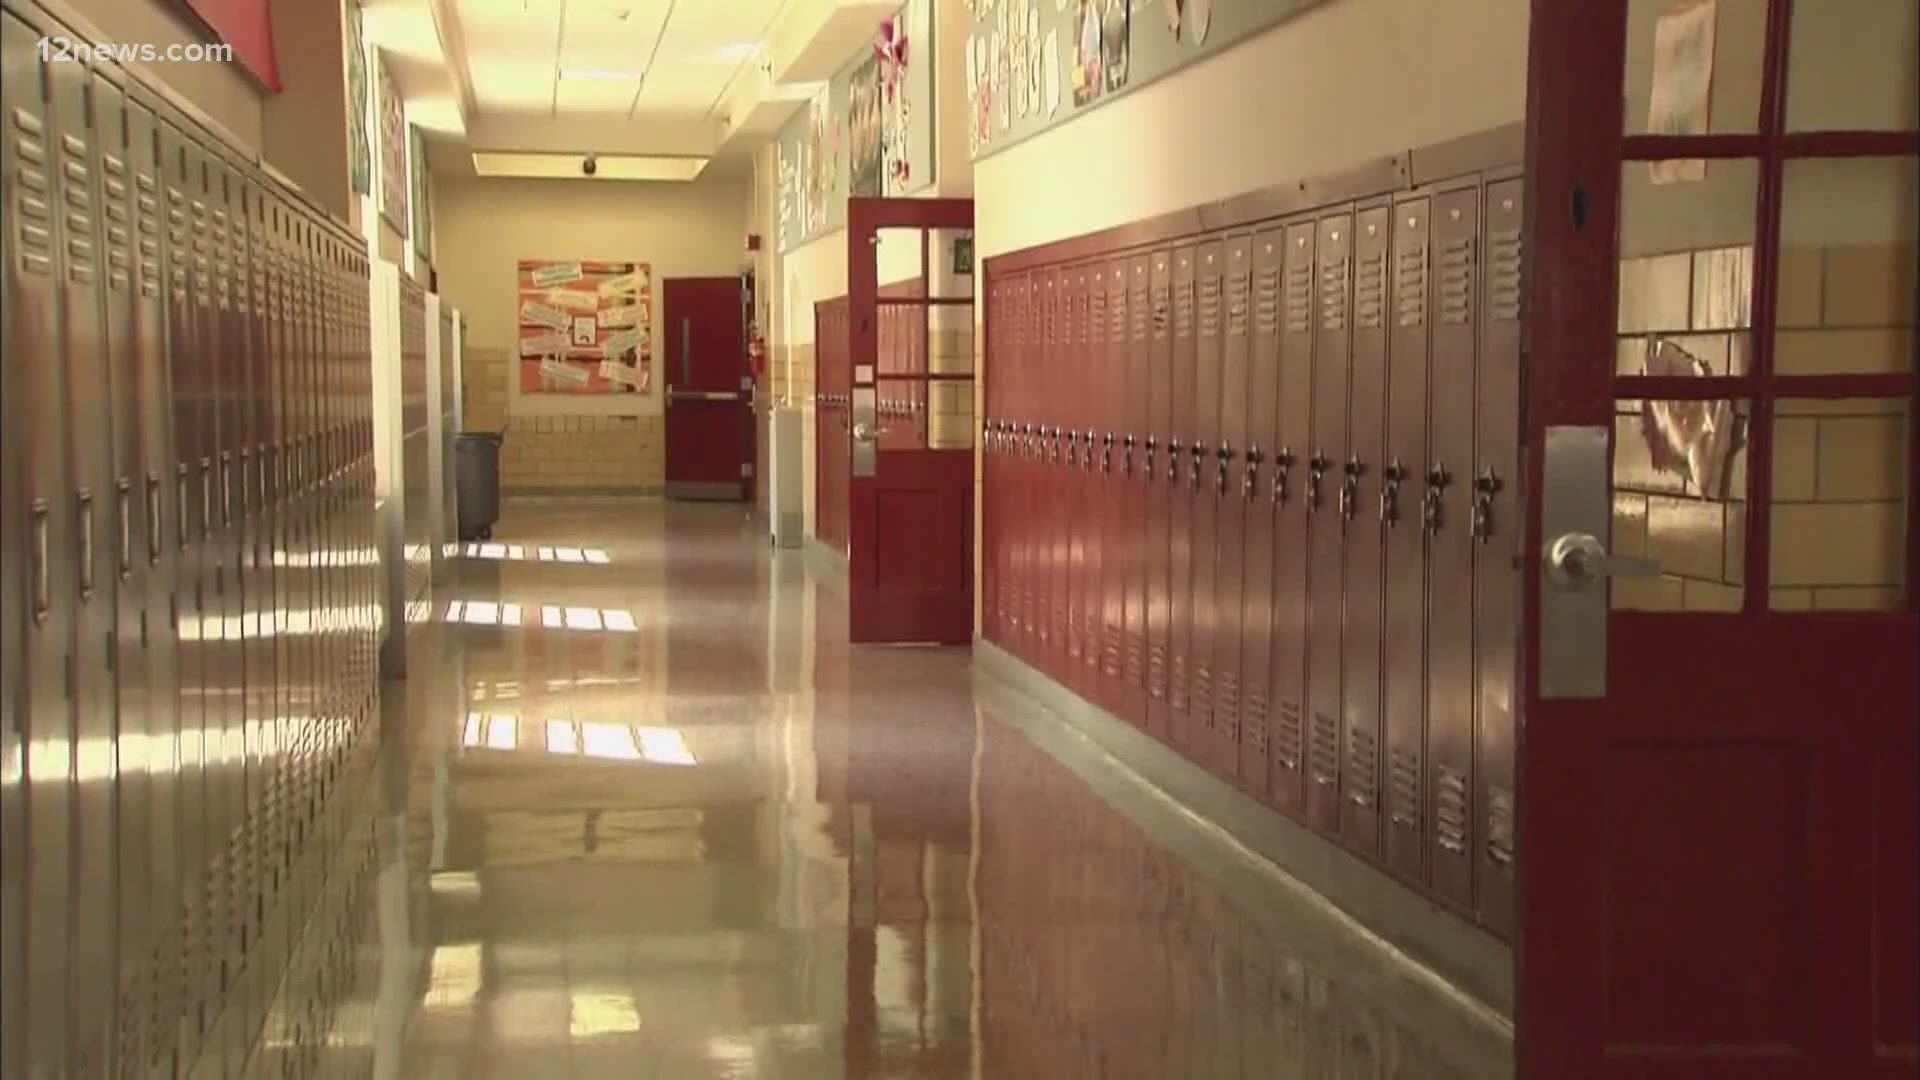 The Kyrene School District in Tempe will require students and staff to wear masks while inside classrooms next school year. Team 12's Jen Wahl has the latest.